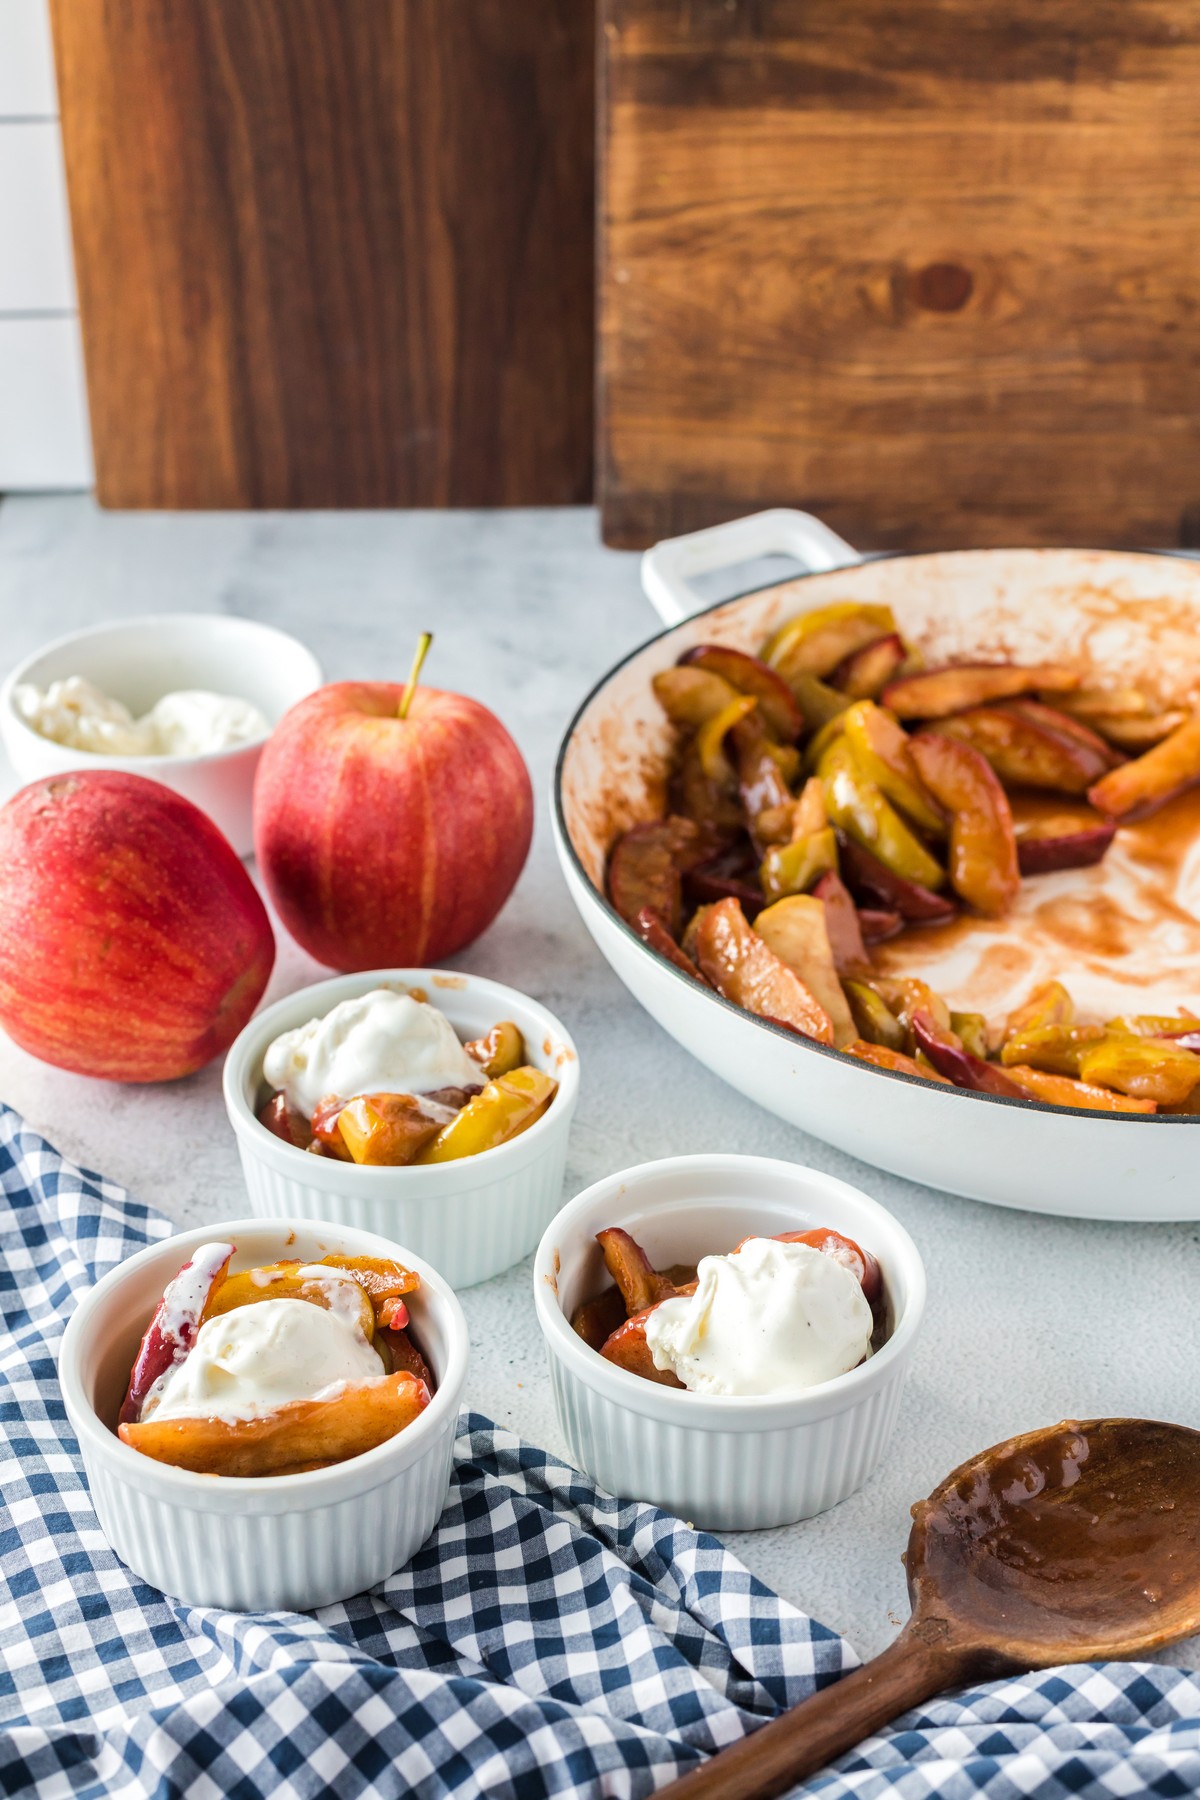 baked apples with serving dishes and apples